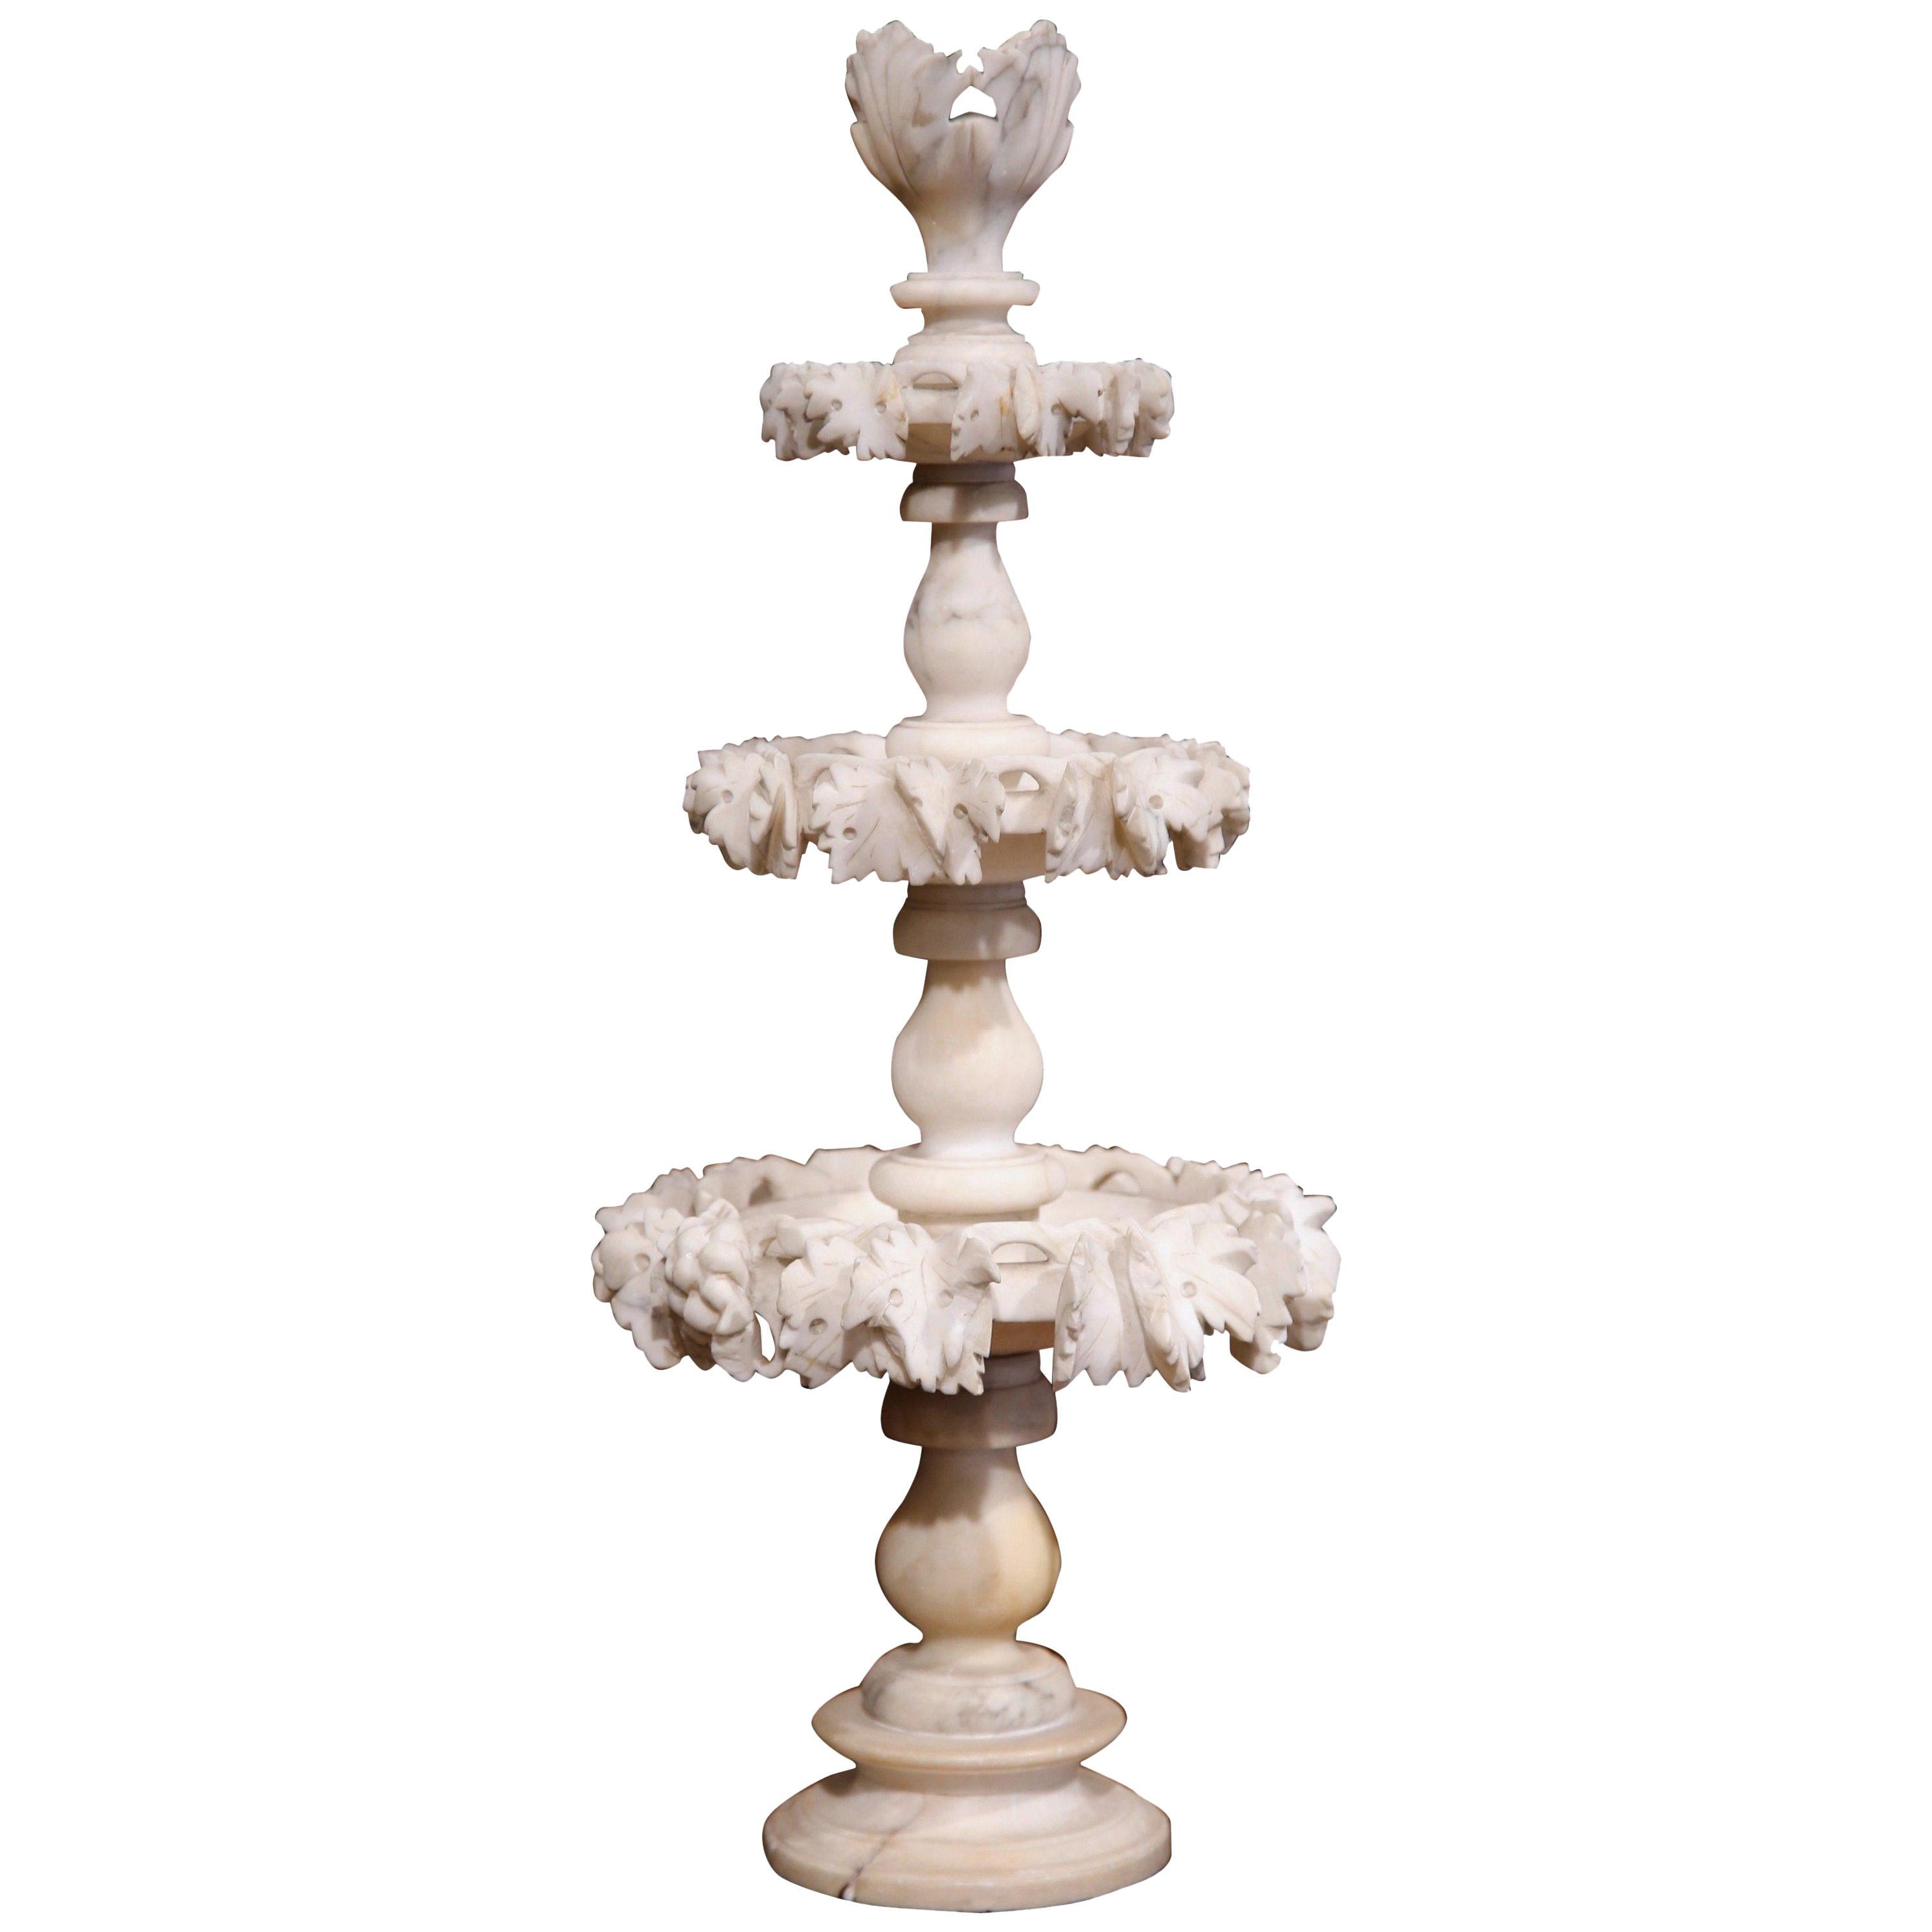 19th Century French Three-Tier Carved Alabaster Display Centrepiece